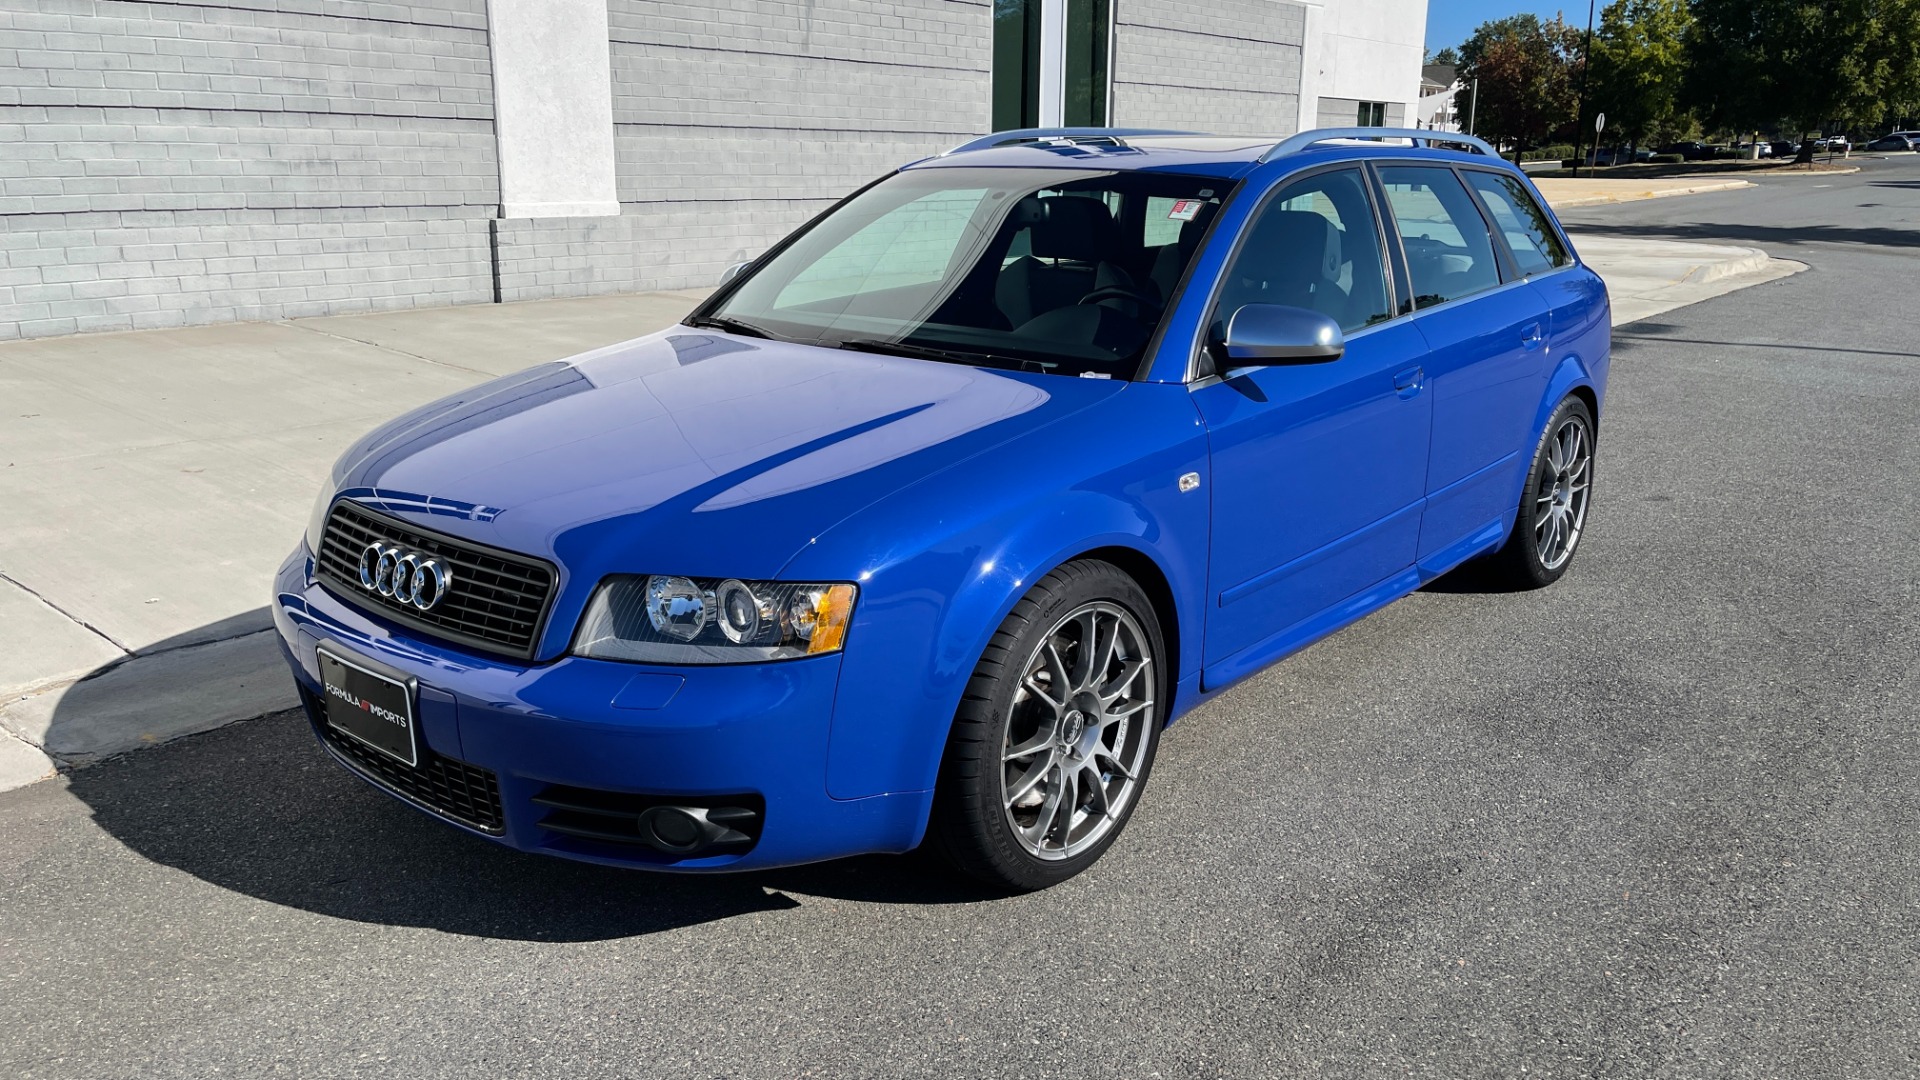 Used 2004 Audi S4 AVANT QUATTRO / VF500 SUPERCHARGED / 4.2L V8 / NOGARO BLUE PEARL for sale $32,995 at Formula Imports in Charlotte NC 28227 4